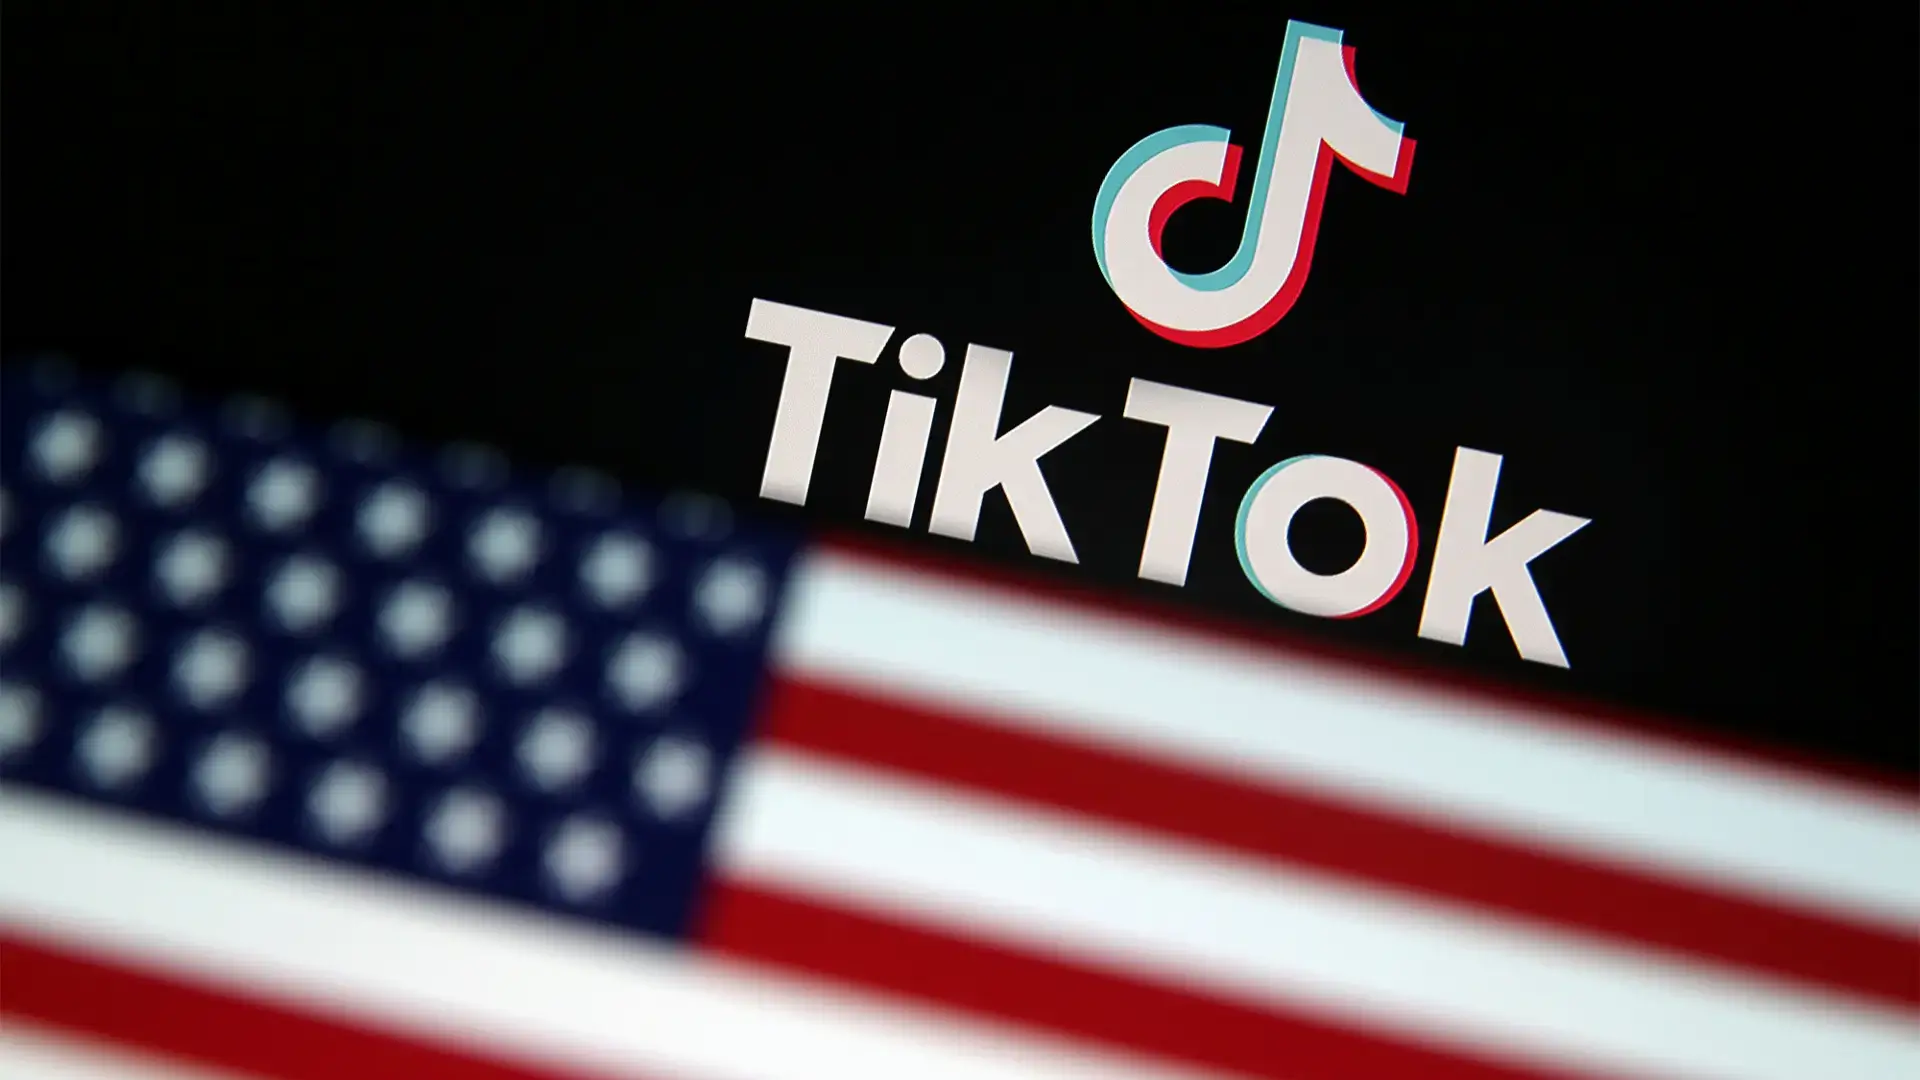 Tiktok Raises Free Speech Concerns Over Bill Passed By Us House That Could Ban The App